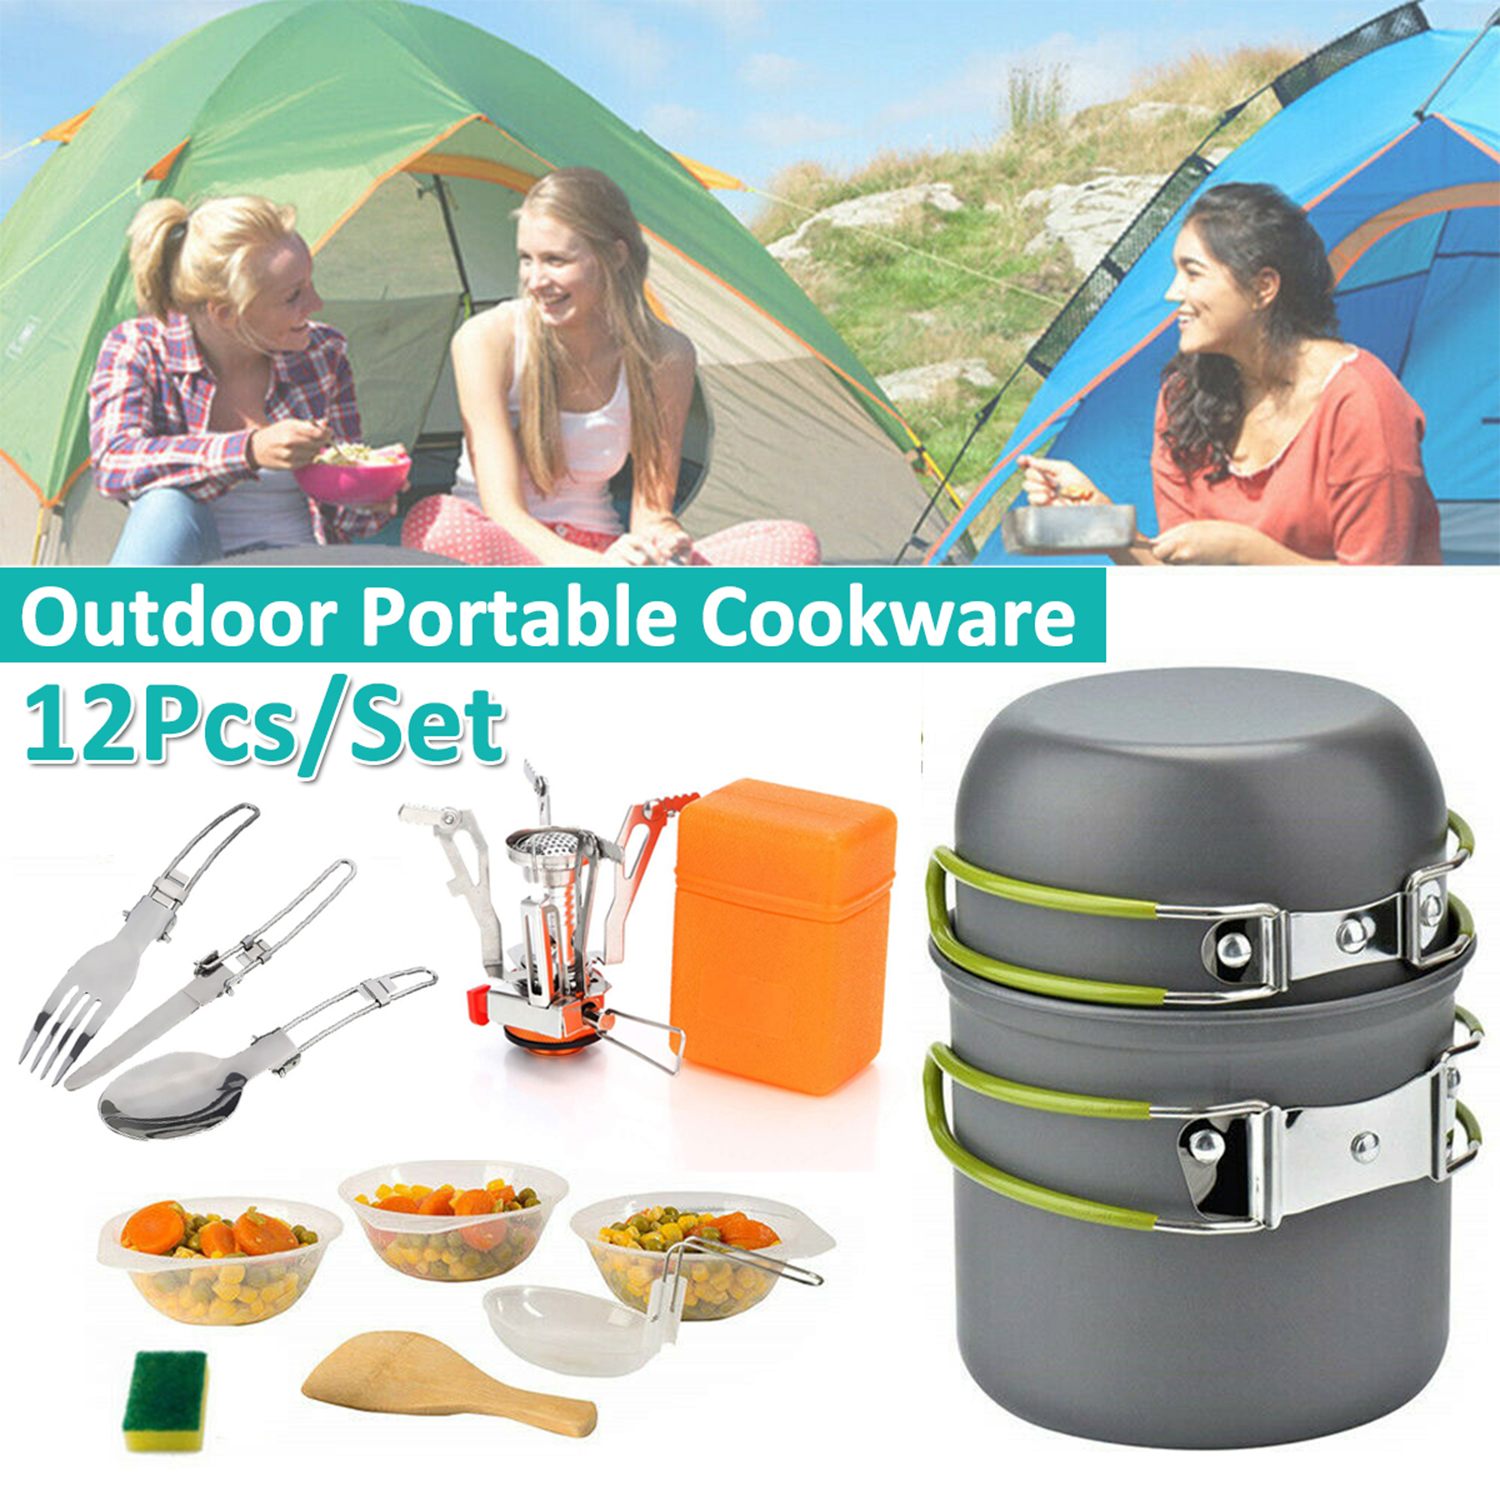 GL Portable Light Outdoor Camping Cookware Sets Gas Stove with Foldable Tableware Pan Dishwashing Sponge Hiking Picnic Tool 18